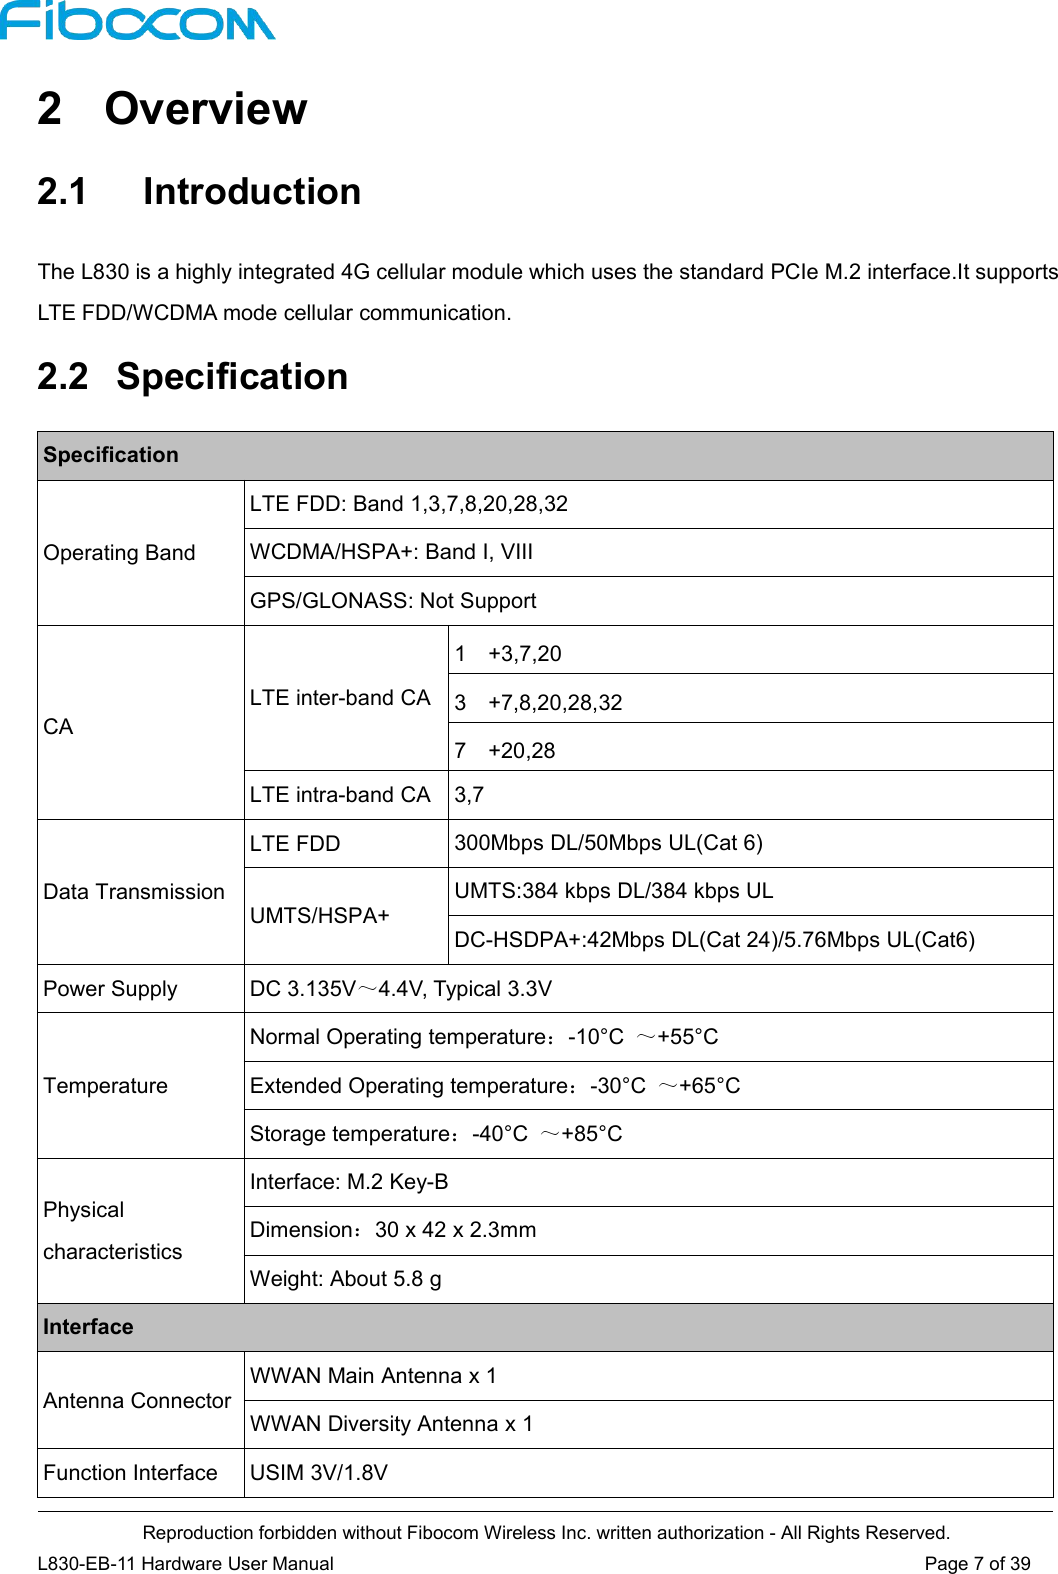 Reproduction forbidden without Fibocom Wireless Inc. written authorization - All Rights Reserved.L830-EB-11 Hardware User Manual Page 7 of 392 Overview2.1 IntroductionThe L830 is a highly integrated 4G cellular module which uses the standard PCIe M.2 interface.It supportsLTE FDD/WCDMA mode cellular communication.2.2 SpecificationSpecificationOperating BandLTE FDD: Band 1,3,7,8,20,28,32WCDMA/HSPA+: Band I, VIIIGPS/GLONASS: Not SupportCALTE inter-band CA1 +3,7,203 +7,8,20,28,327 +20,28LTE intra-band CA 3,7Data TransmissionLTE FDD 300Mbps DL/50Mbps UL(Cat 6)UMTS/HSPA+UMTS:384 kbps DL/384 kbps ULDC-HSDPA+:42Mbps DL(Cat 24)/5.76Mbps UL(Cat6)Power Supply DC 3.135V～4.4V, Typical 3.3VTemperatureNormal Operating temperature：-10°C ～+55°CExtended Operating temperature：-30°C ～+65°CStorage temperature：-40°C ～+85°CPhysicalcharacteristicsInterface: M.2 Key-BDimension：30 x 42 x 2.3mmWeight: About 5.8 gInterfaceAntenna ConnectorWWAN Main Antenna x 1WWAN Diversity Antenna x 1Function Interface USIM 3V/1.8V